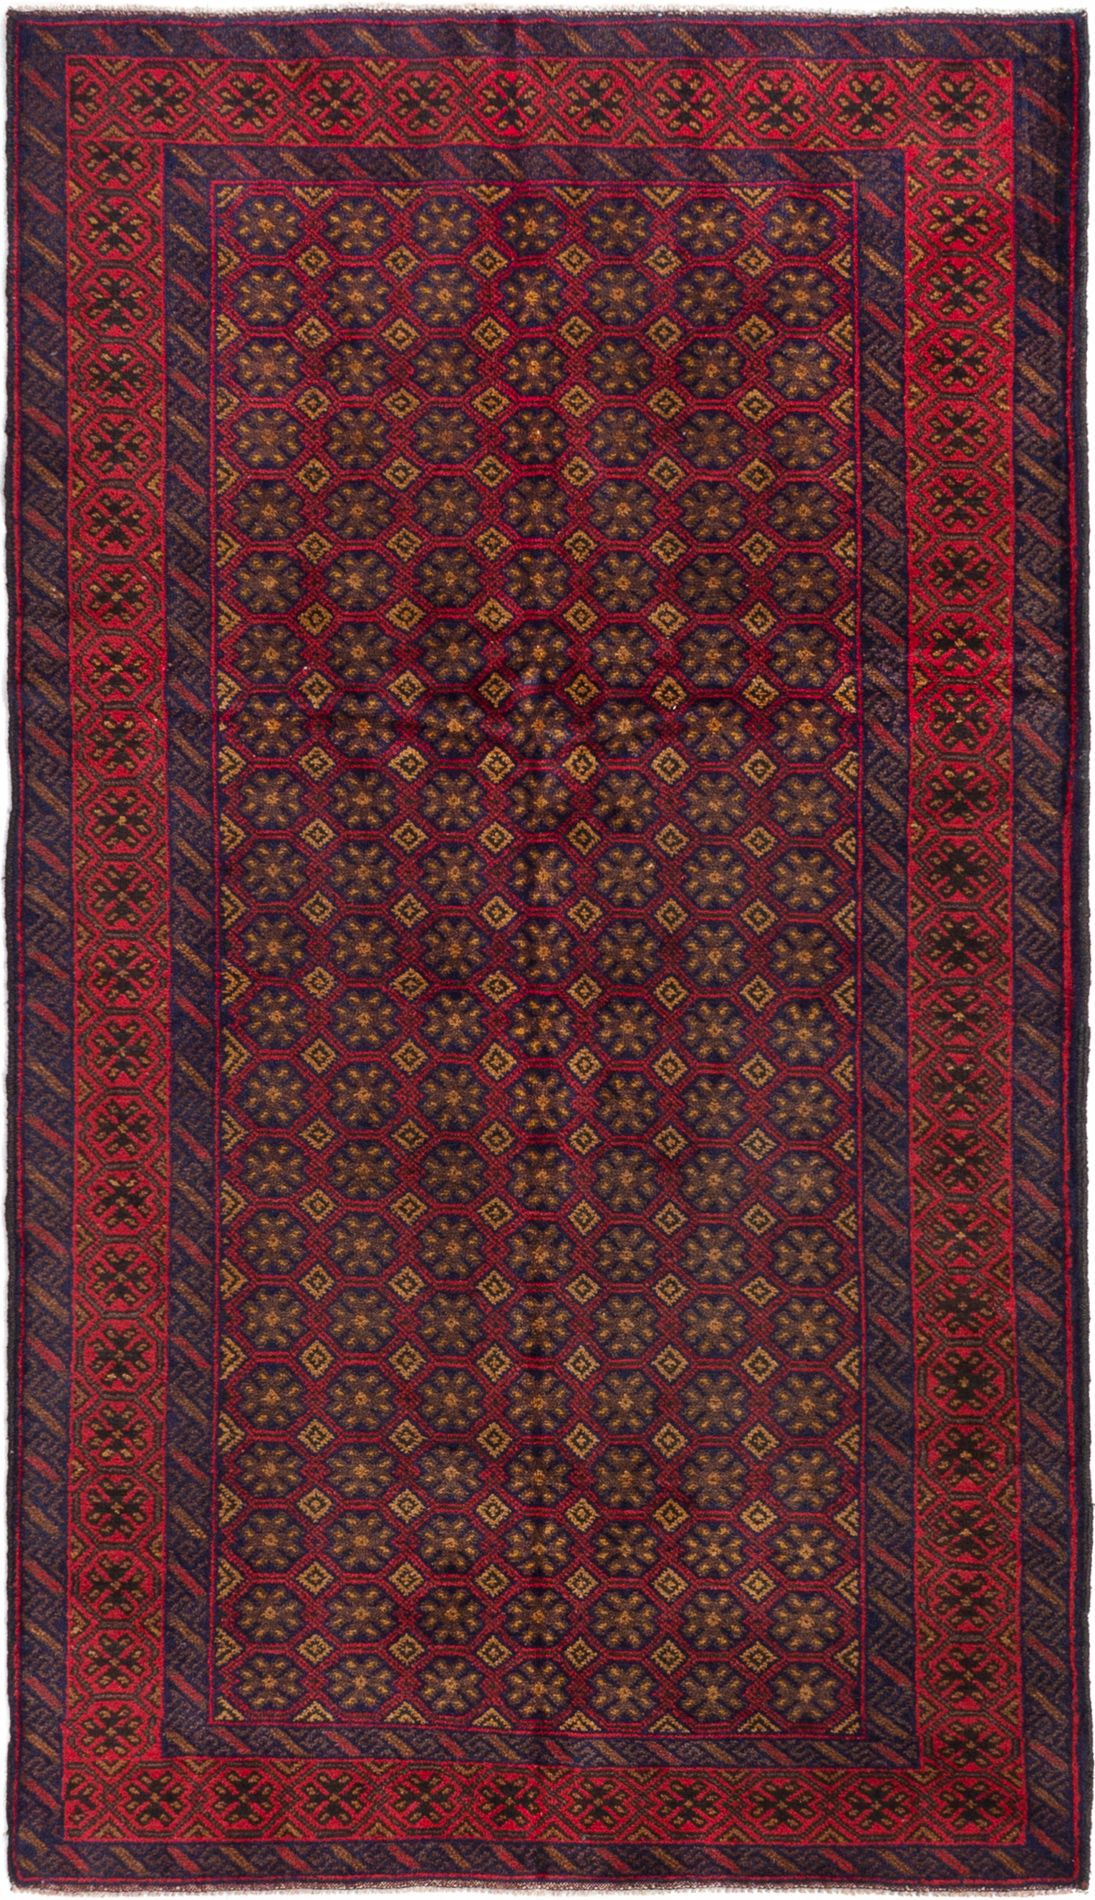 Hand-knotted Teimani Red Wool Rug 3'7" x 6'2" Size: 3'7" x 6'2"  